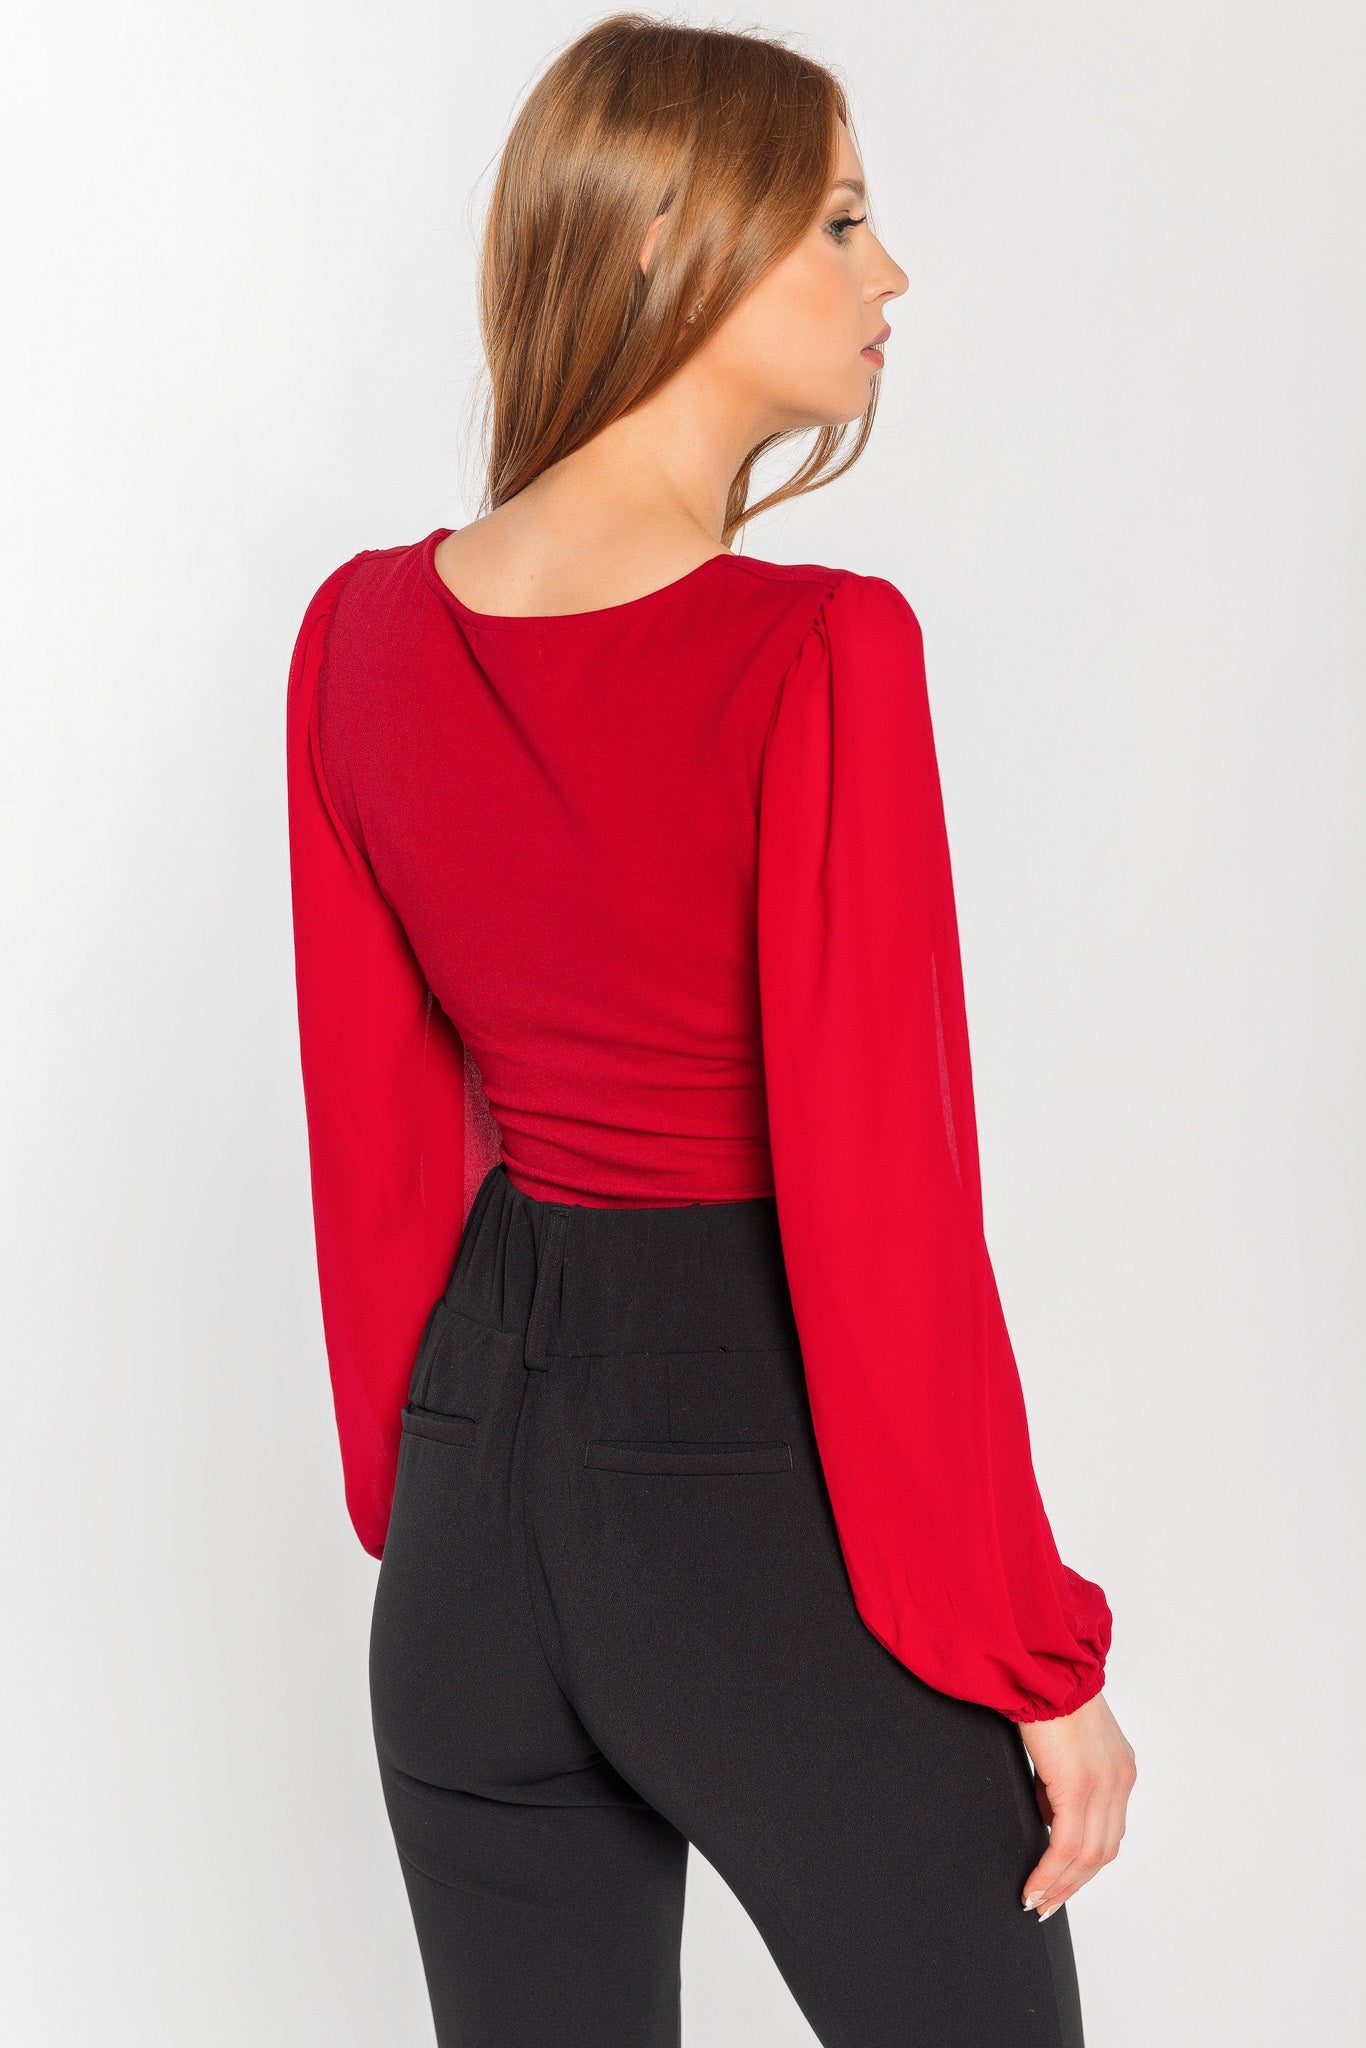 Scuba Crop Top with Chiffon Sleeves